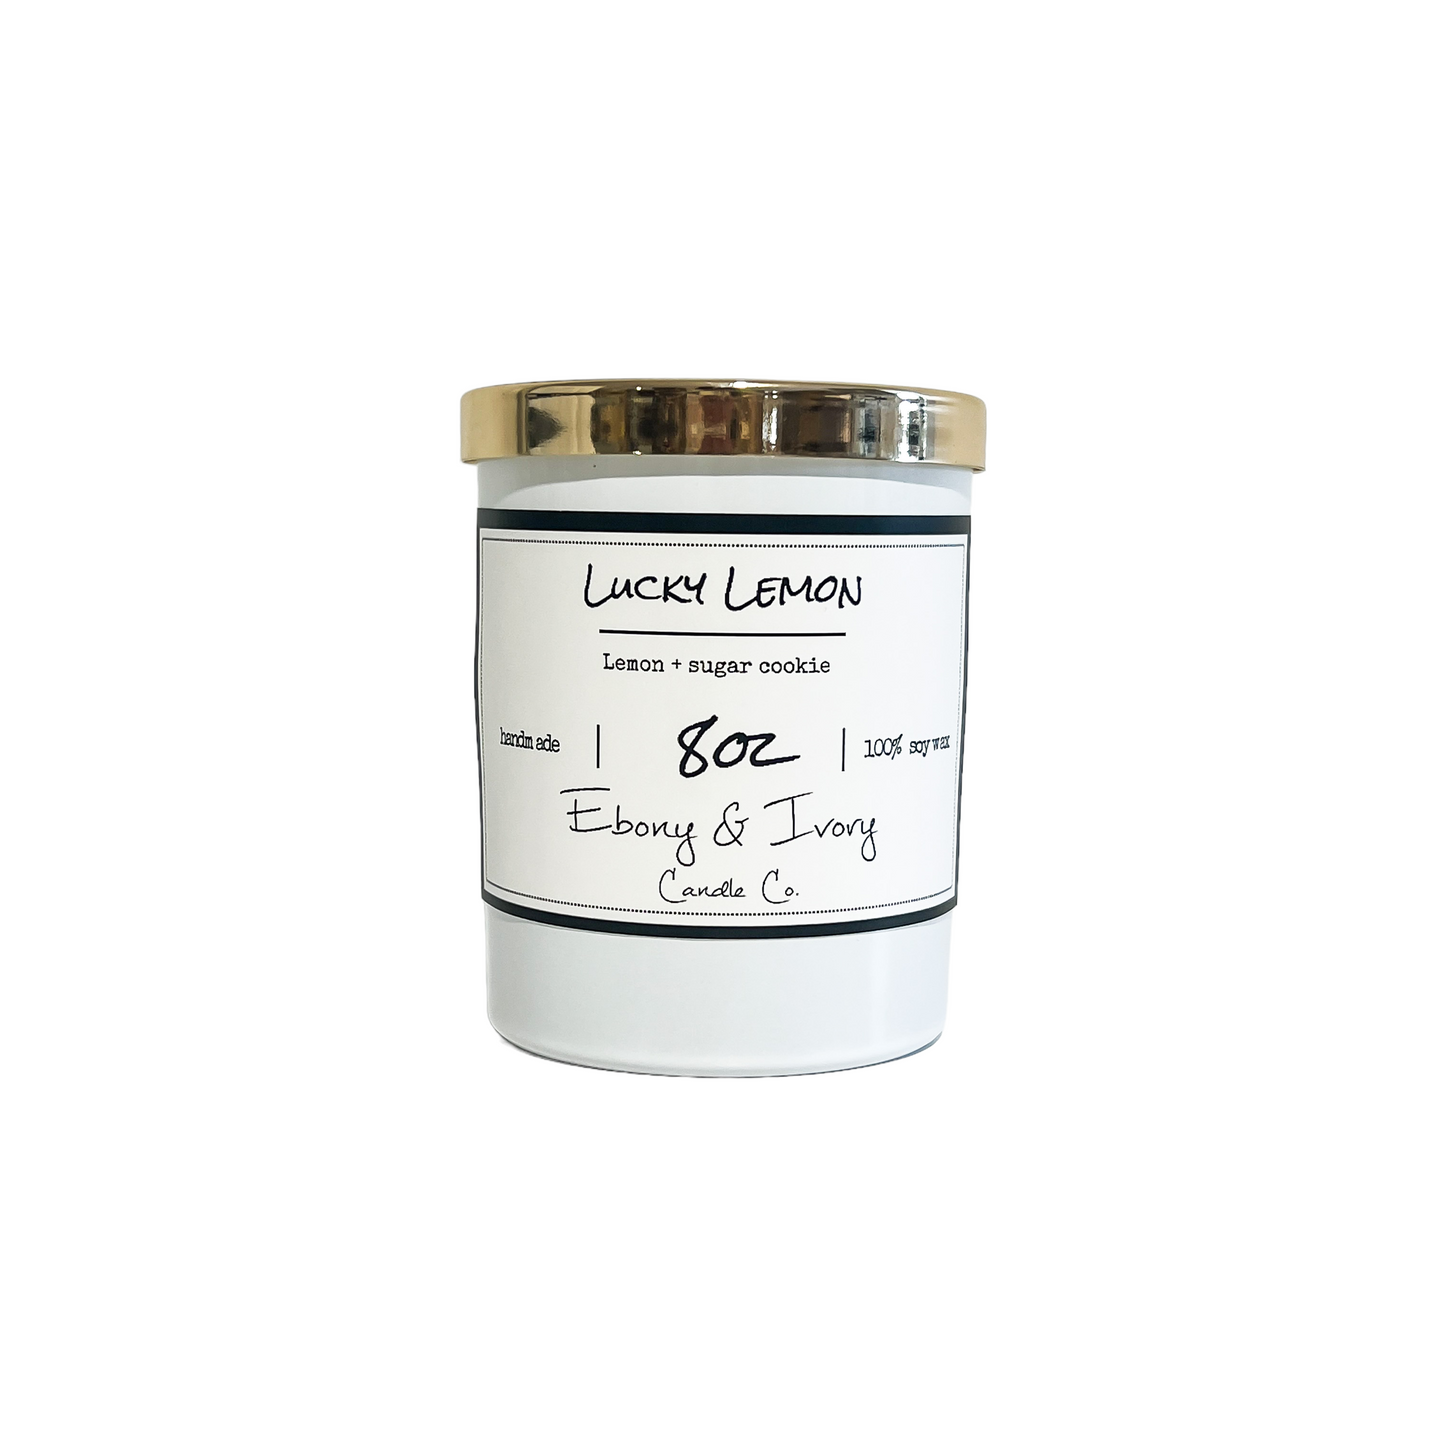 White, eight ounce, lemon and sugar cookies scented soy wax candle with a gold lid and a white label